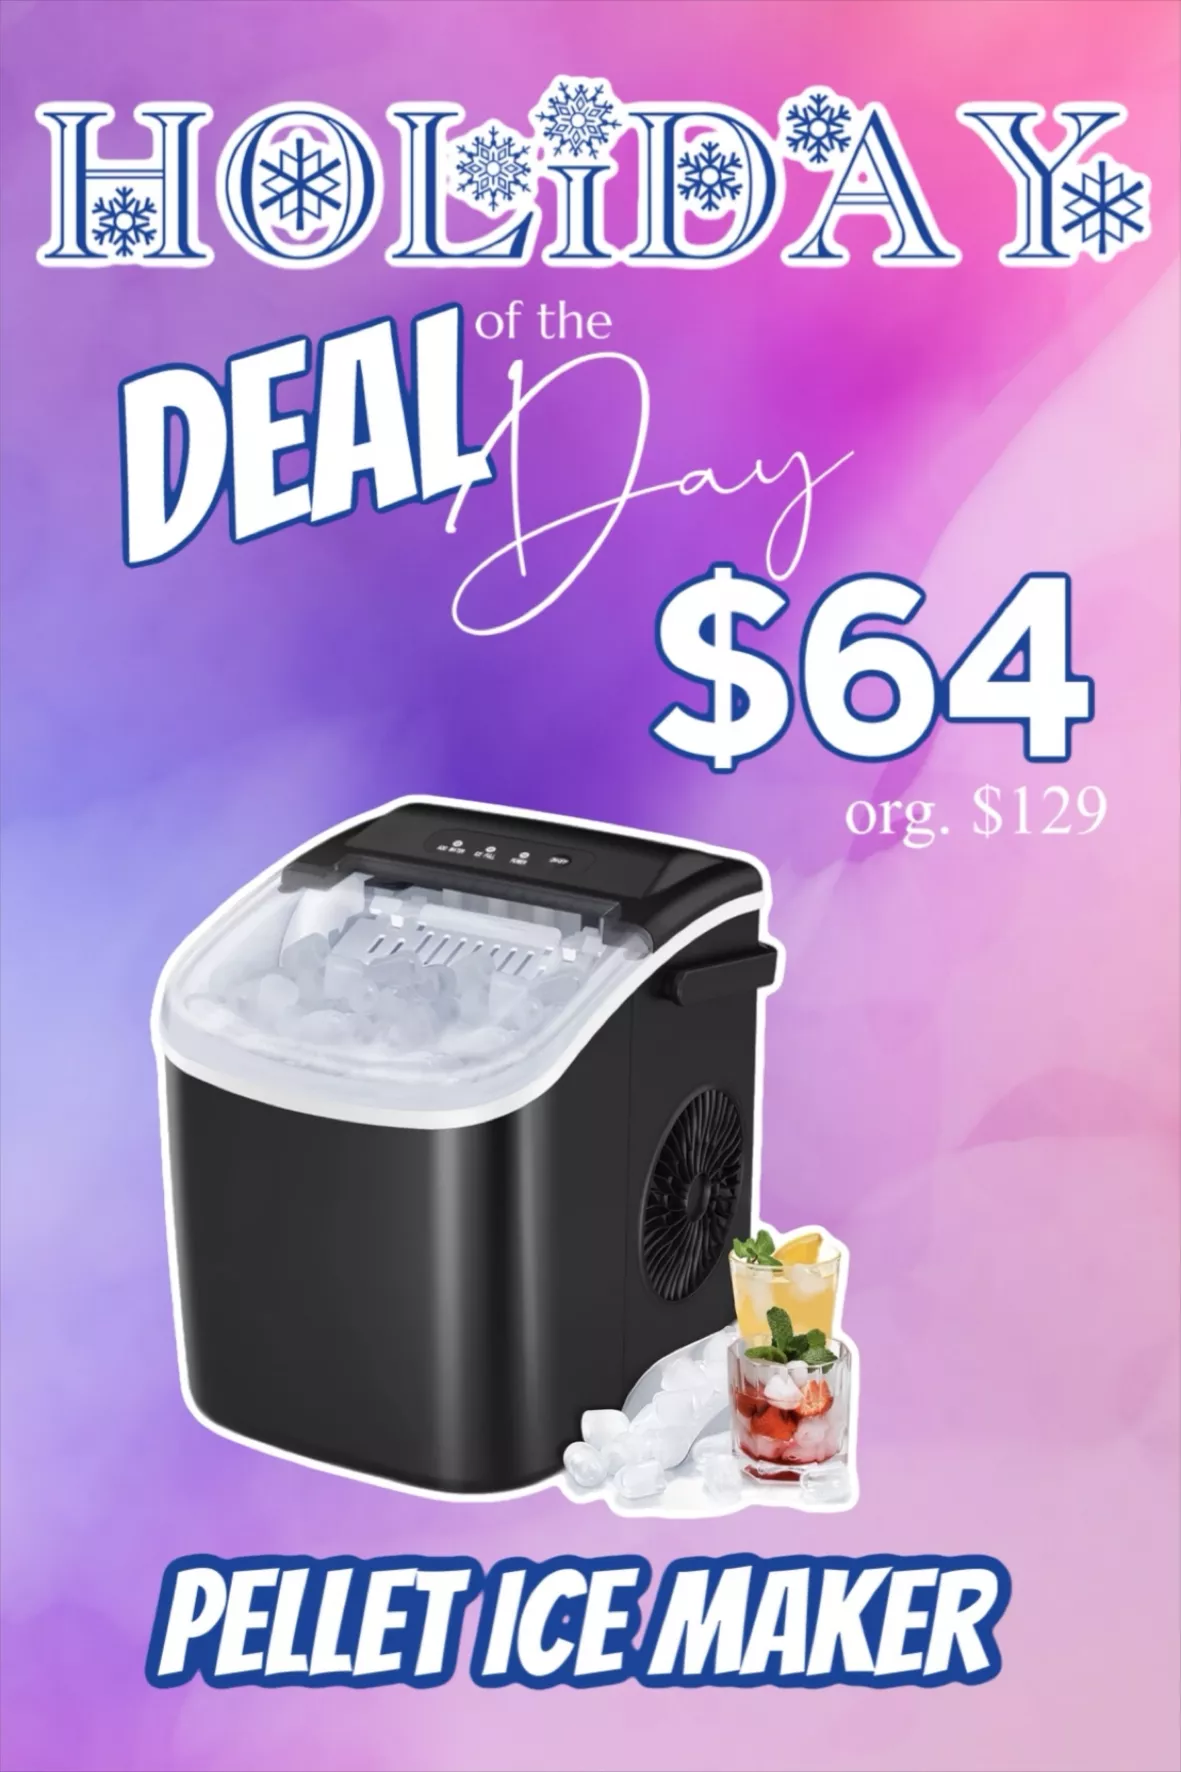 Compact and Portable Ice Maker, Purple